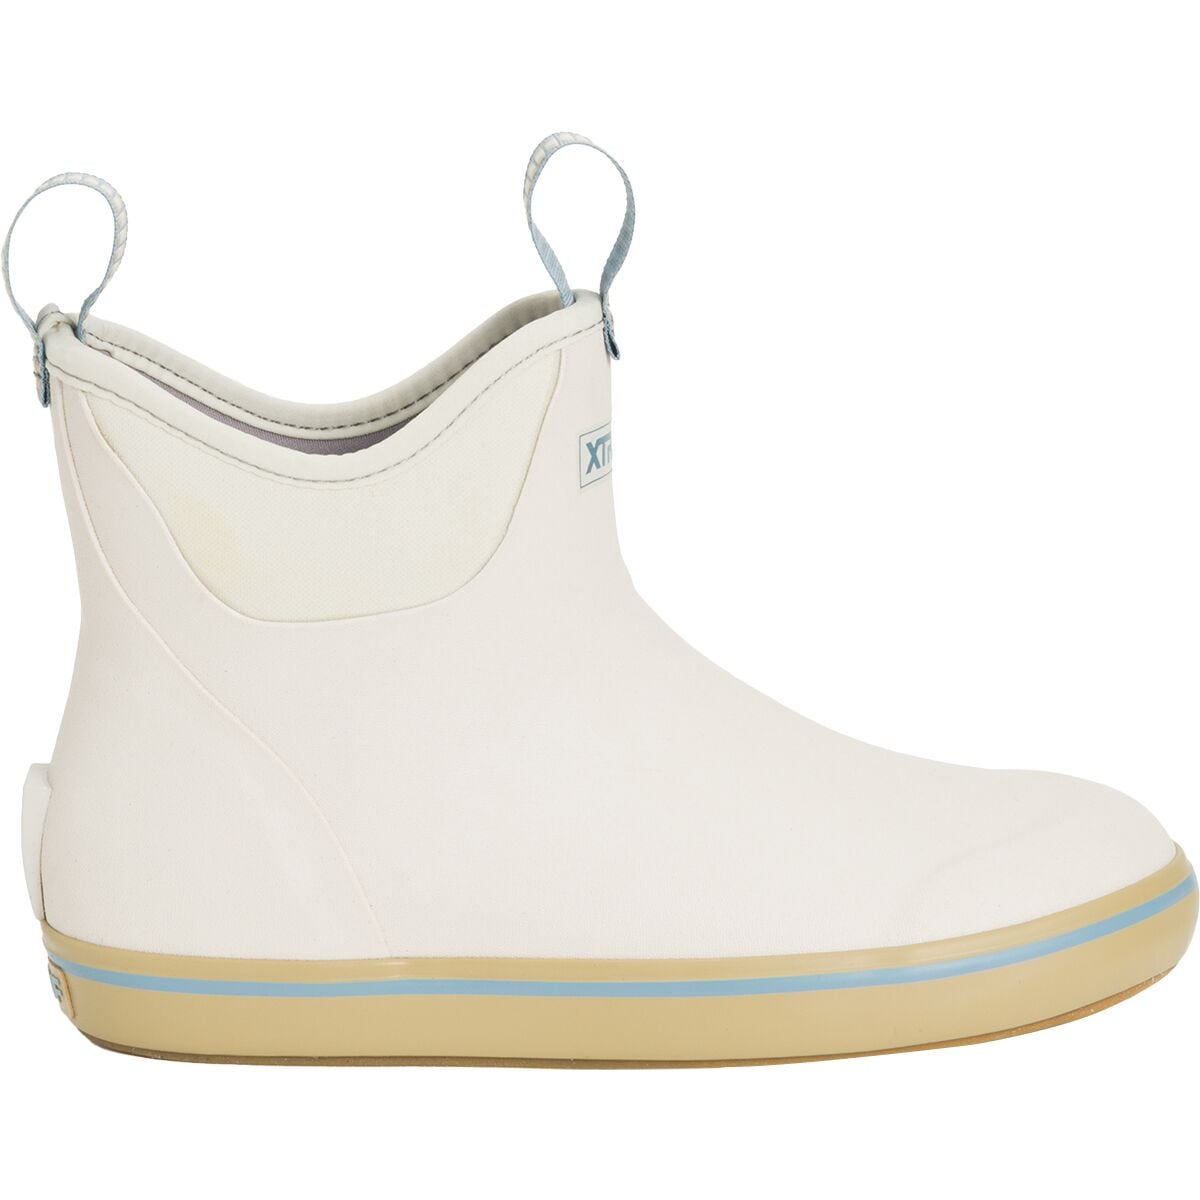 Ankle 6in Deck Boot - Women